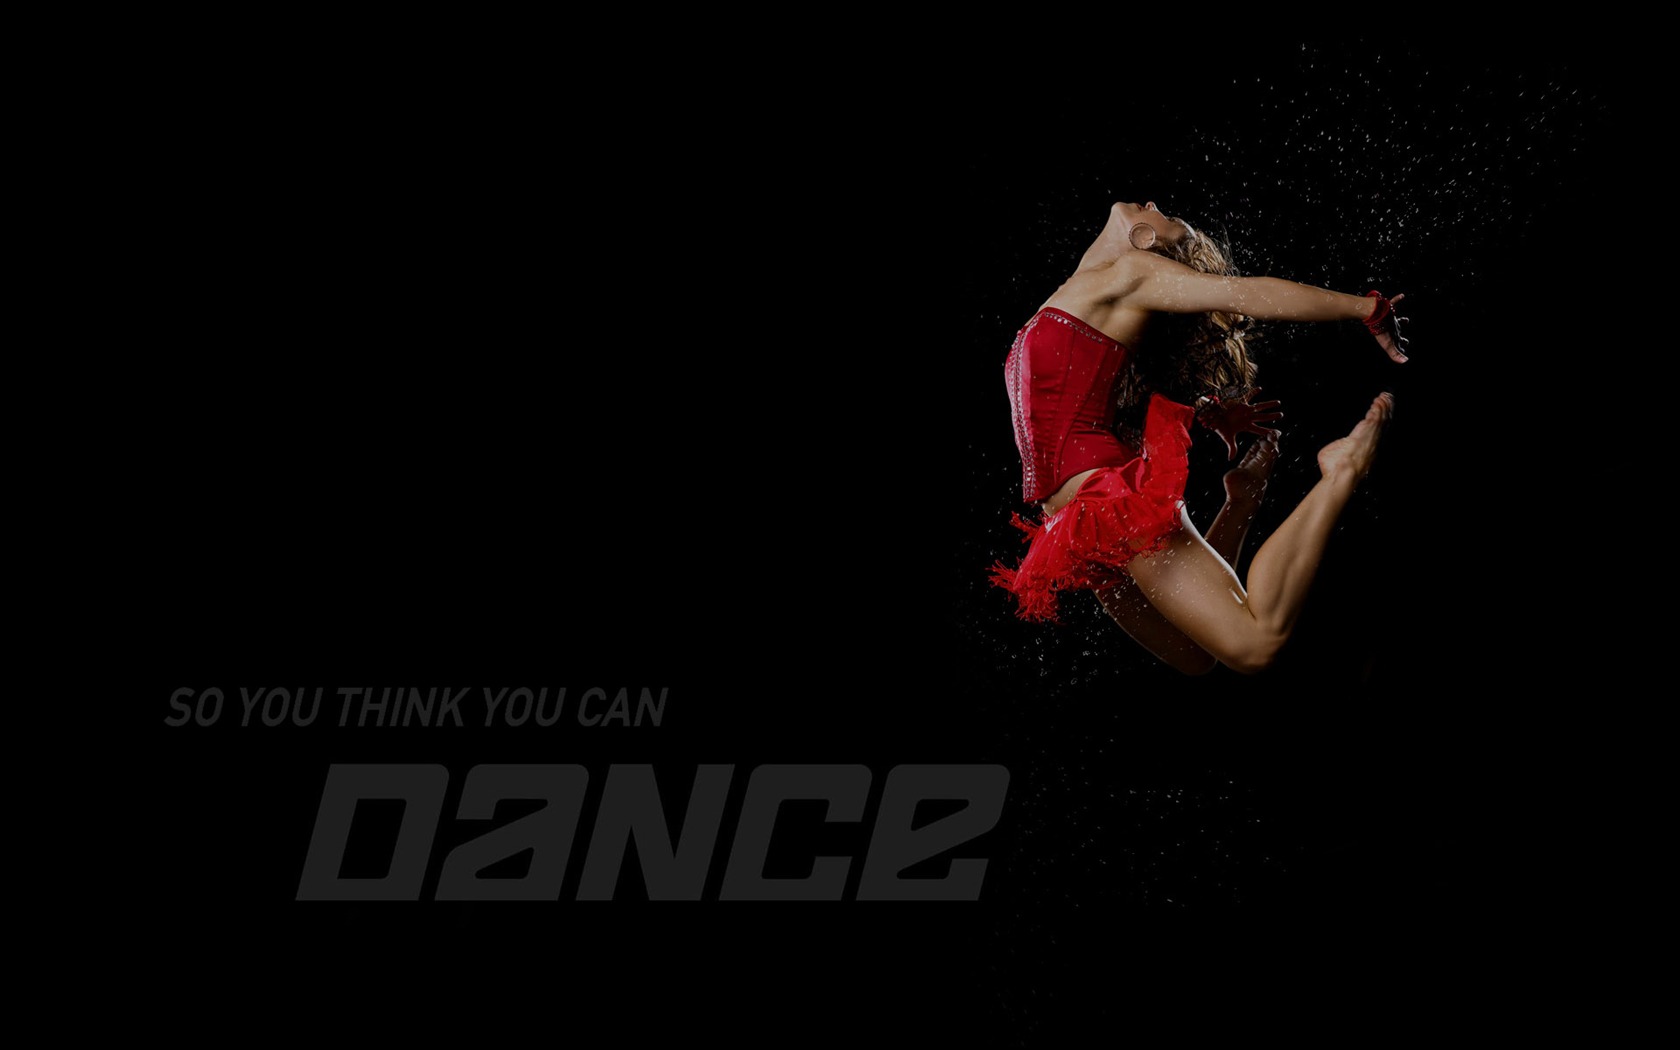 So You Think You Can Dance 舞林争霸 壁纸(二)1 - 1680x1050